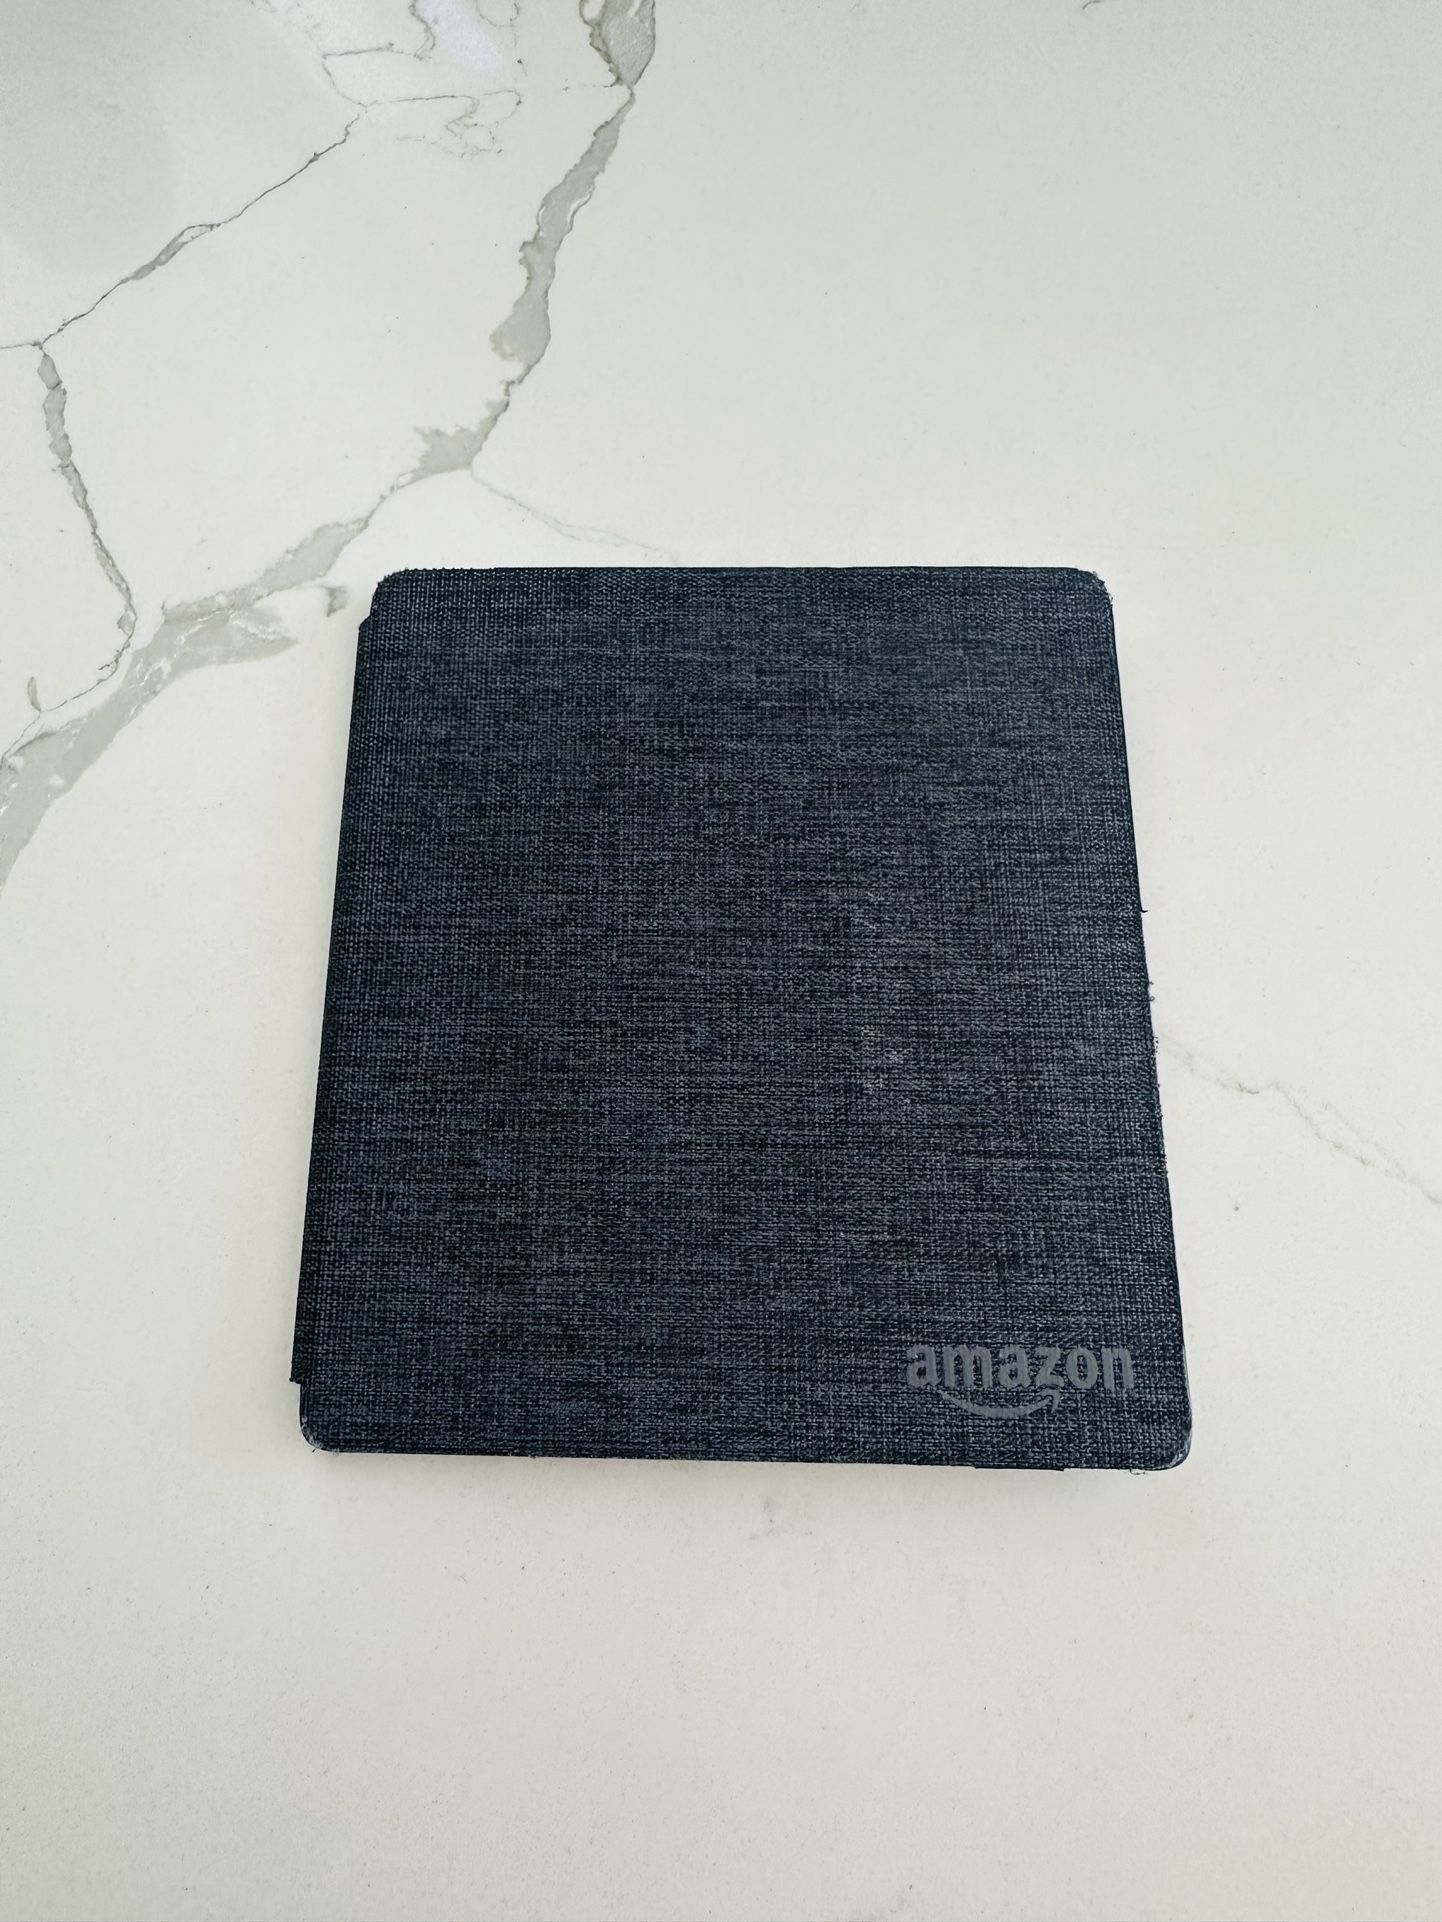 Kindle Oasis 2 (10th Generation) with Amazon Kindle Water-safe Fabric Cover Charcoal Black Case